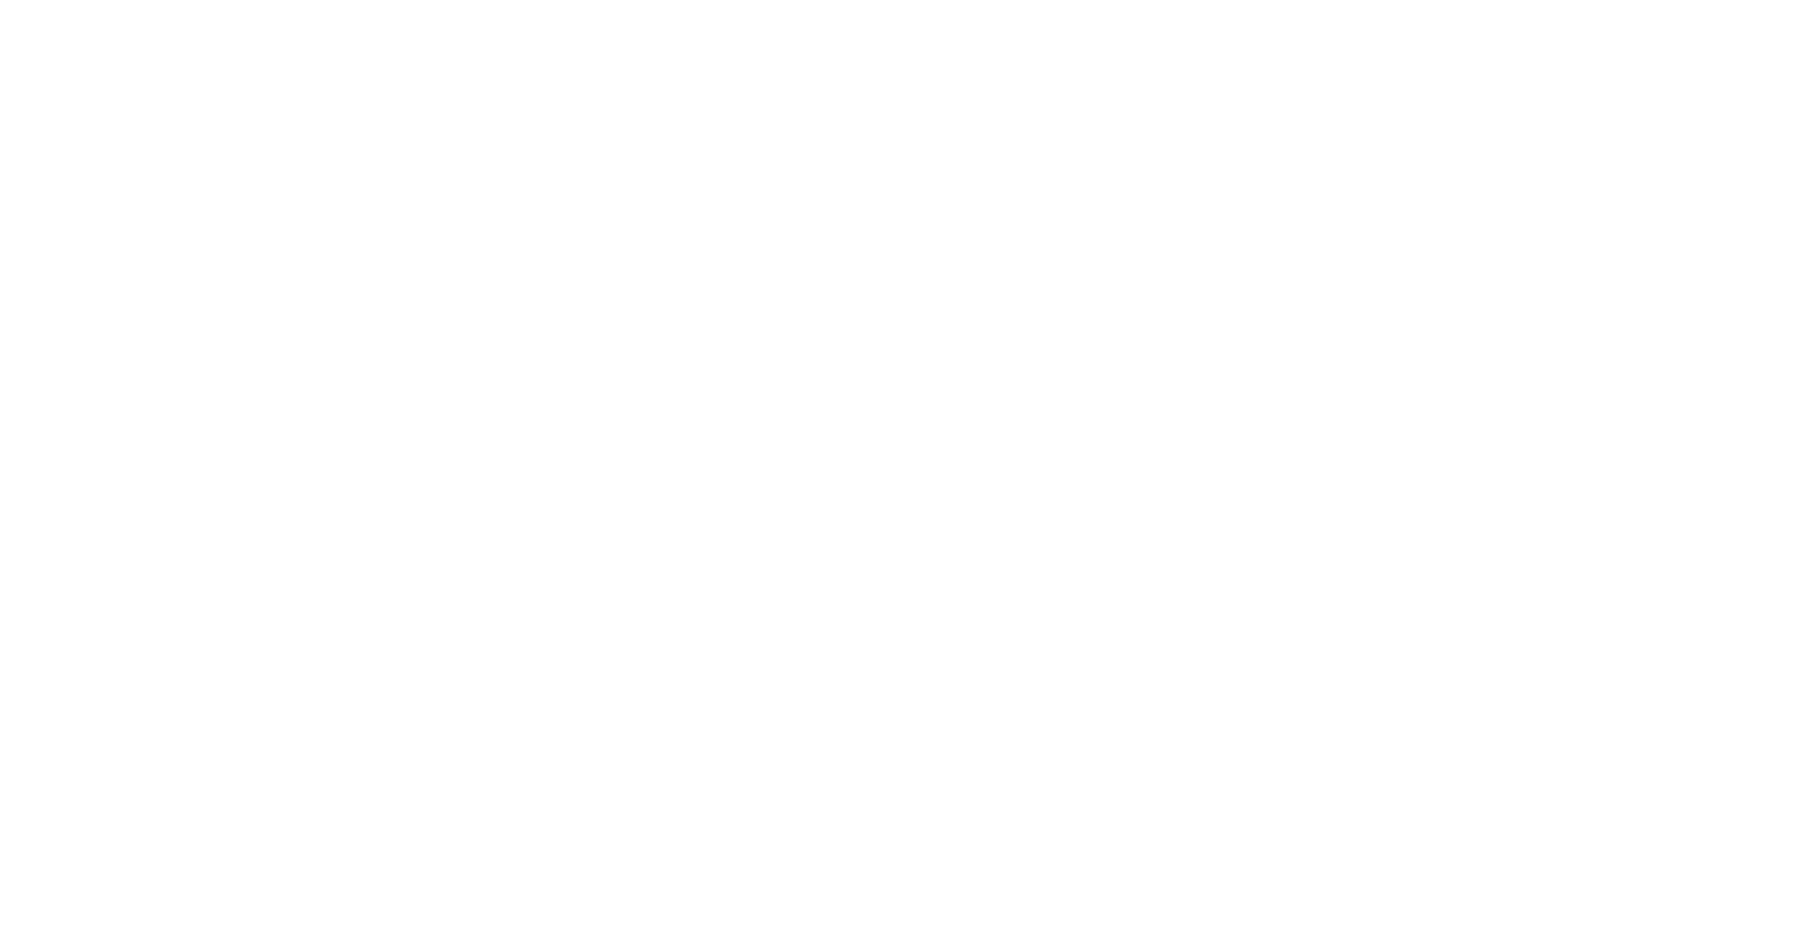 Geometric texture on a transparent background.